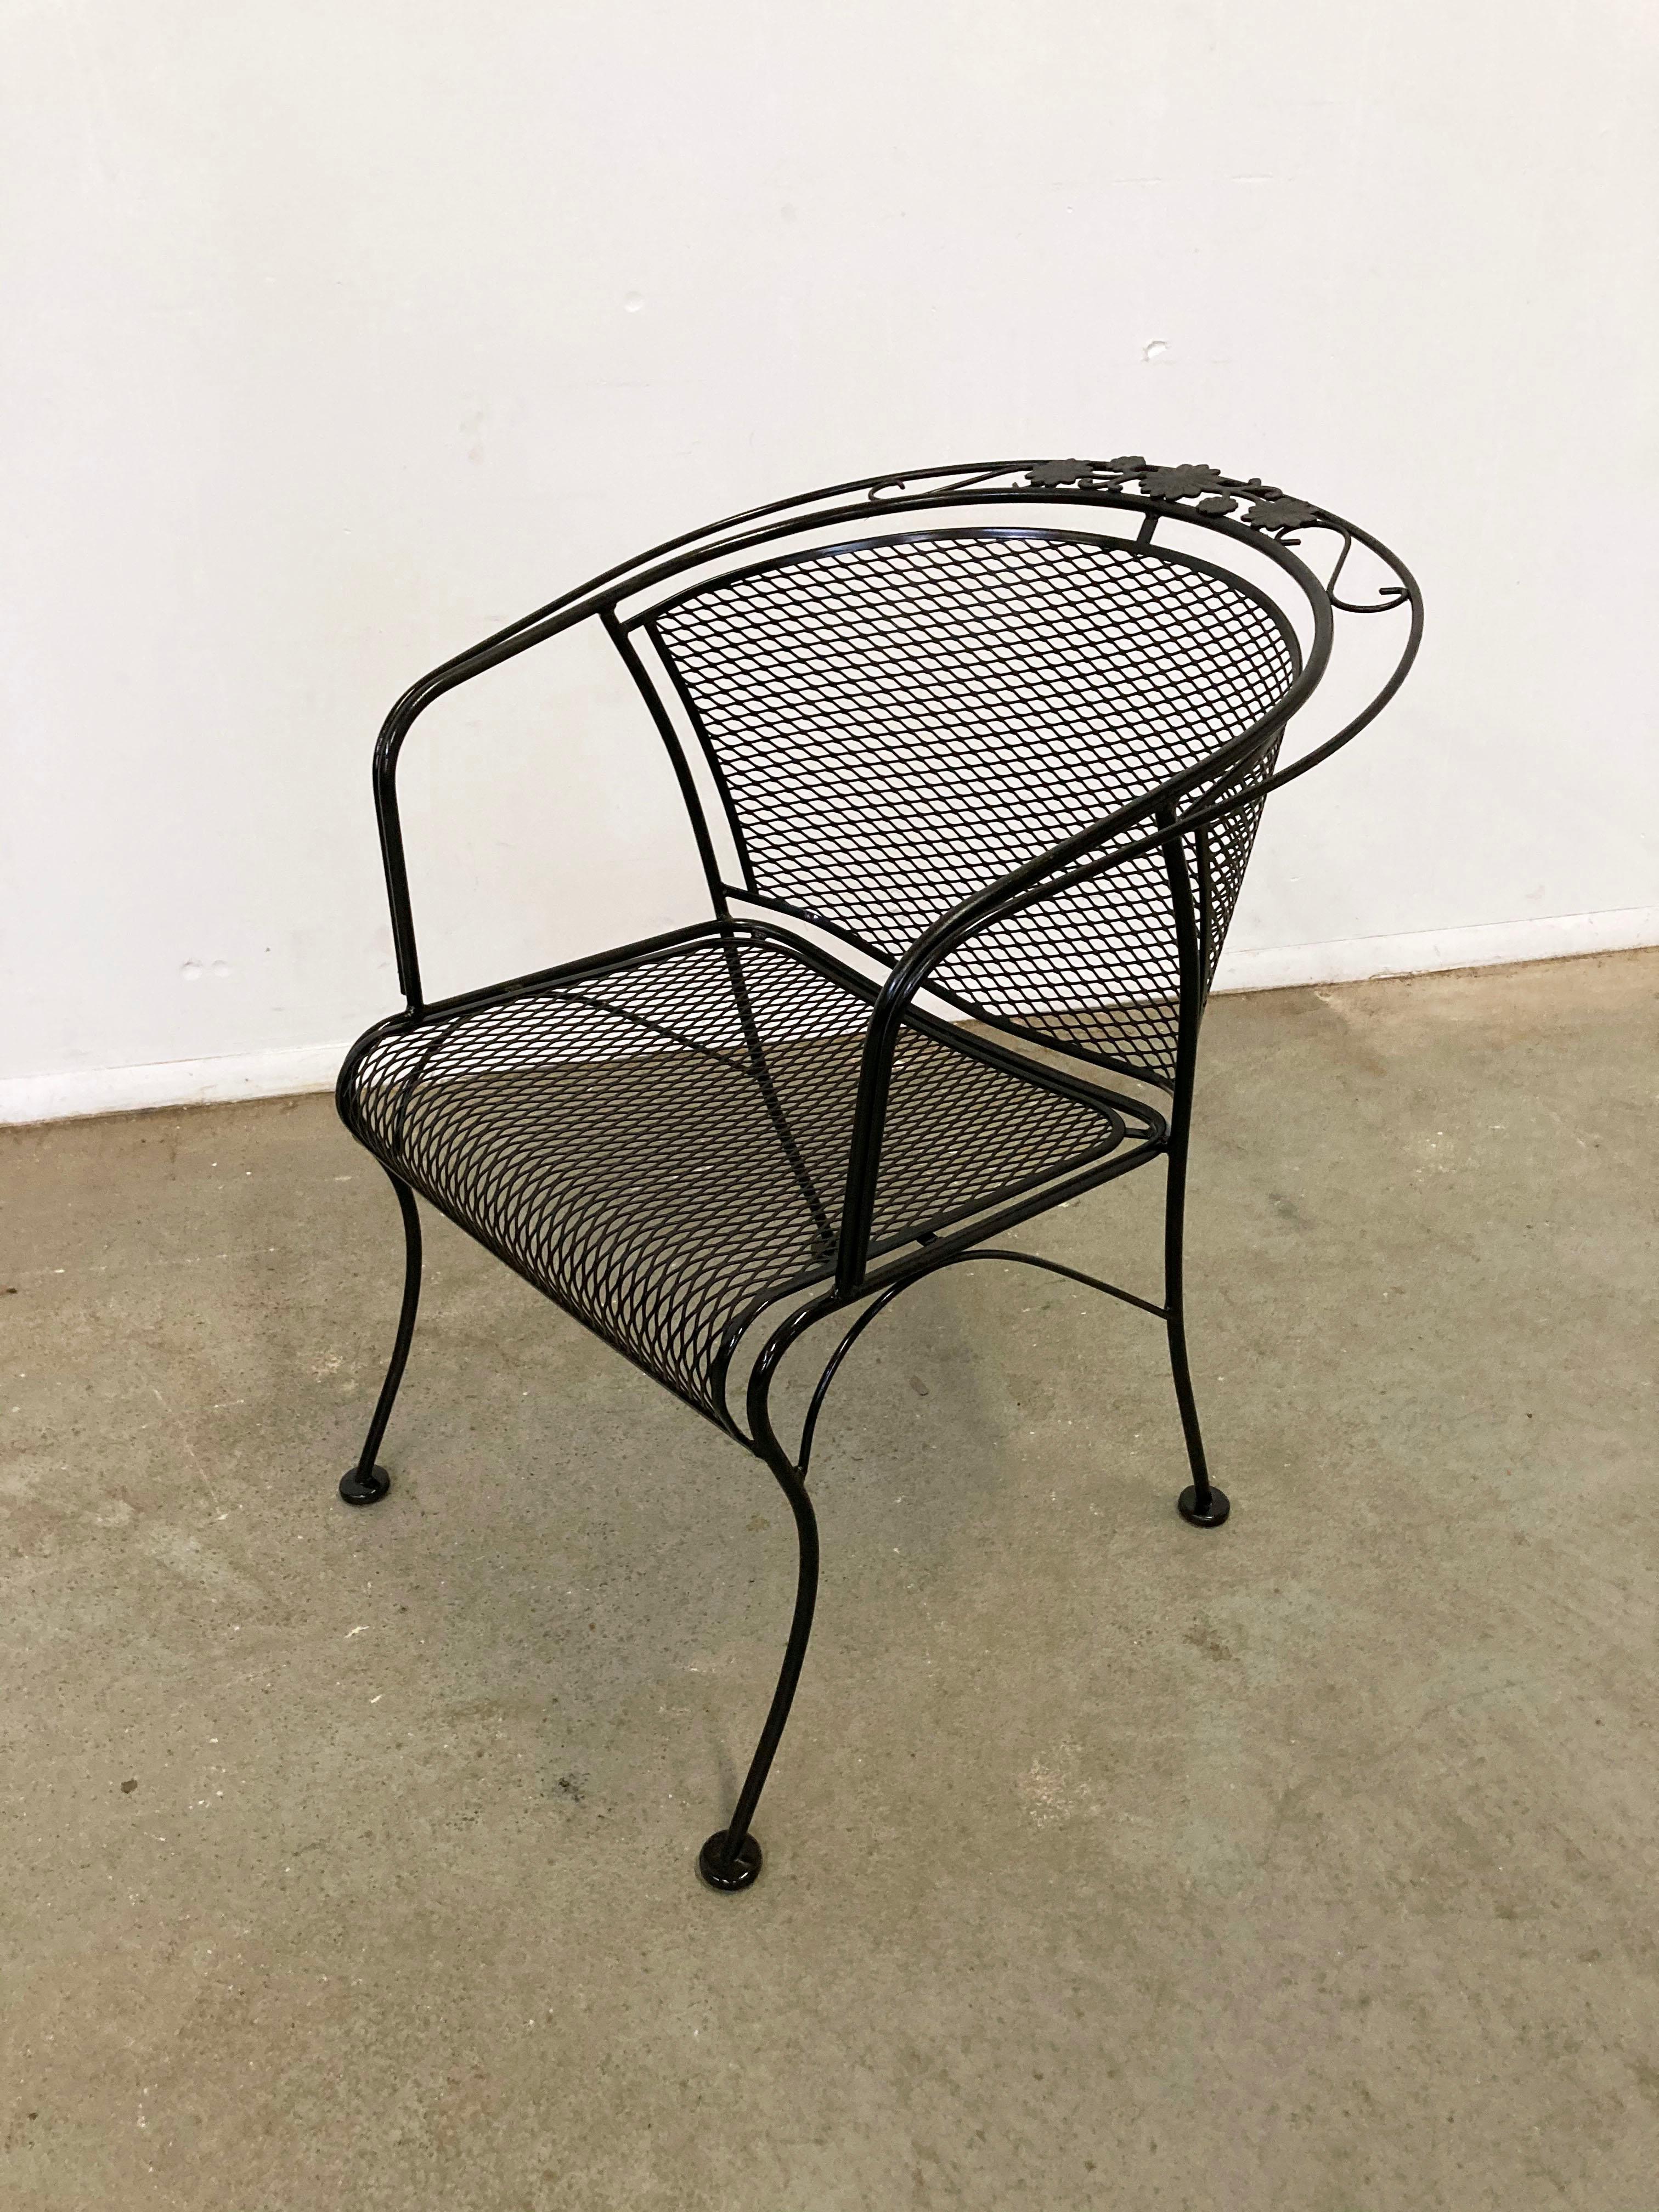 Offered is a vintage Woodard Briarwood patio chair. It has a wrought-iron frame with a mesh seat and curved legs. Features a floral design on the chair back. In good condition, structurally sound, and has been repainted. It is not